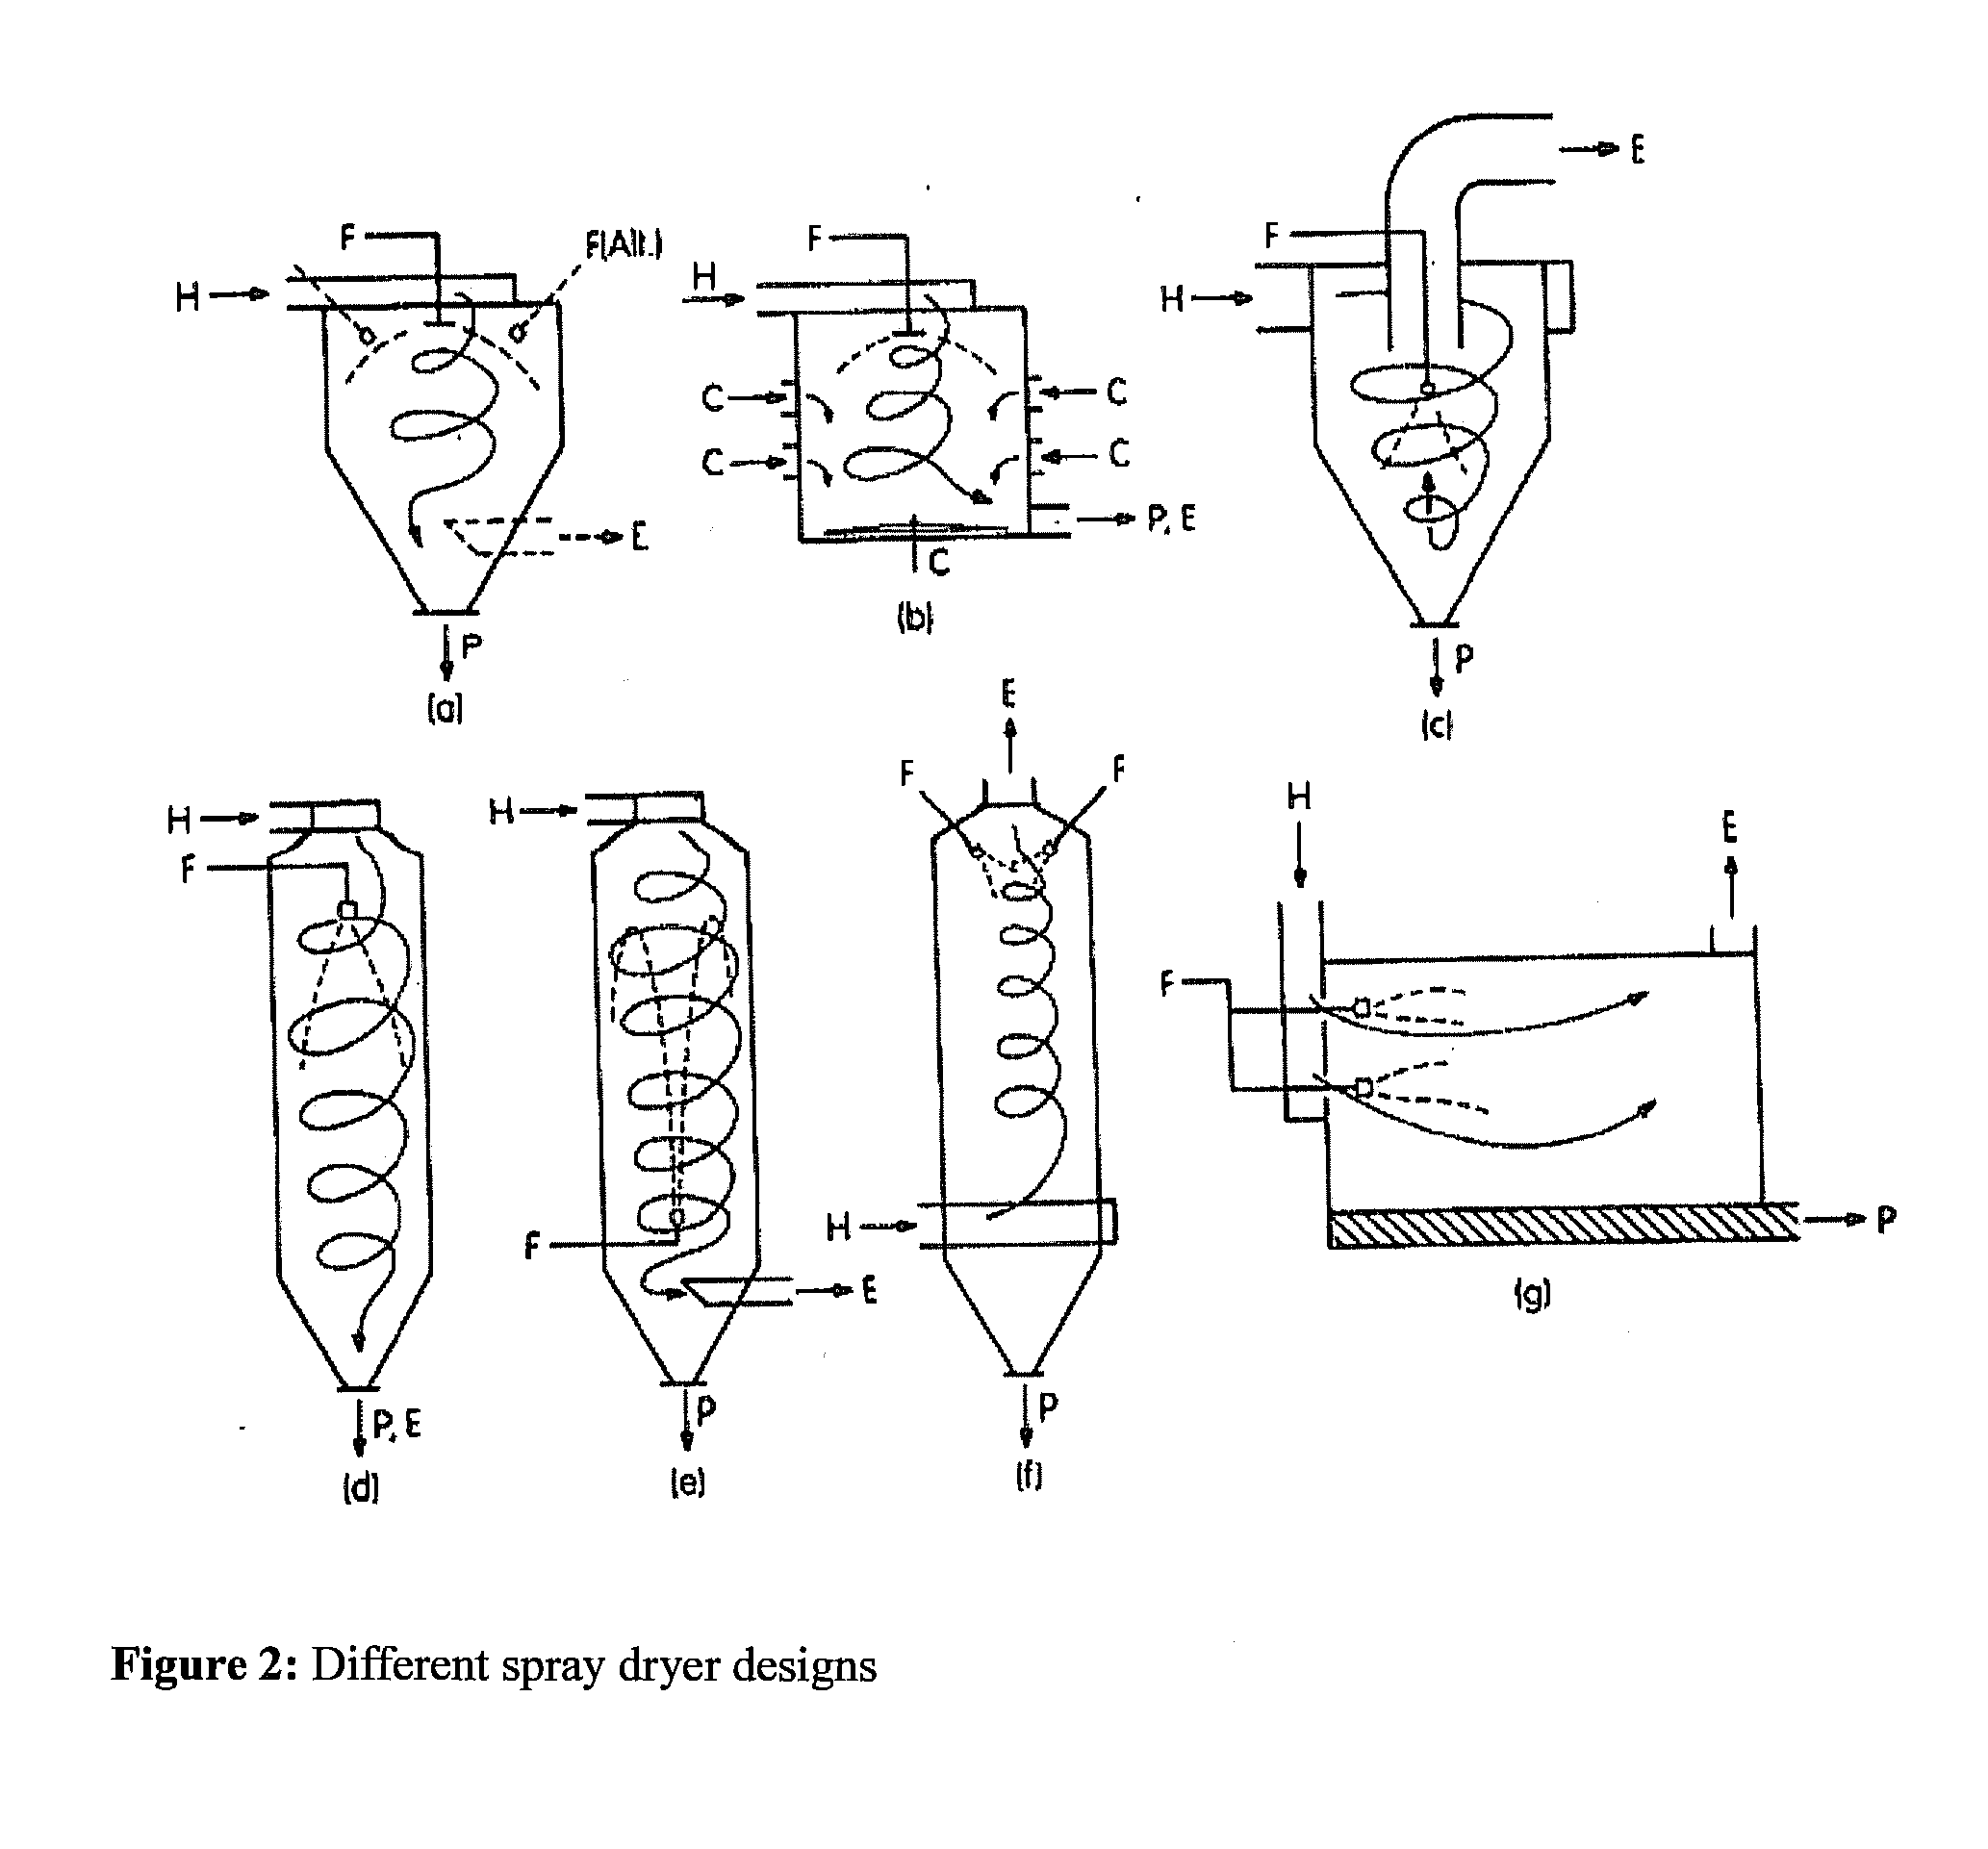 Process for Spray Drying Botanical Food